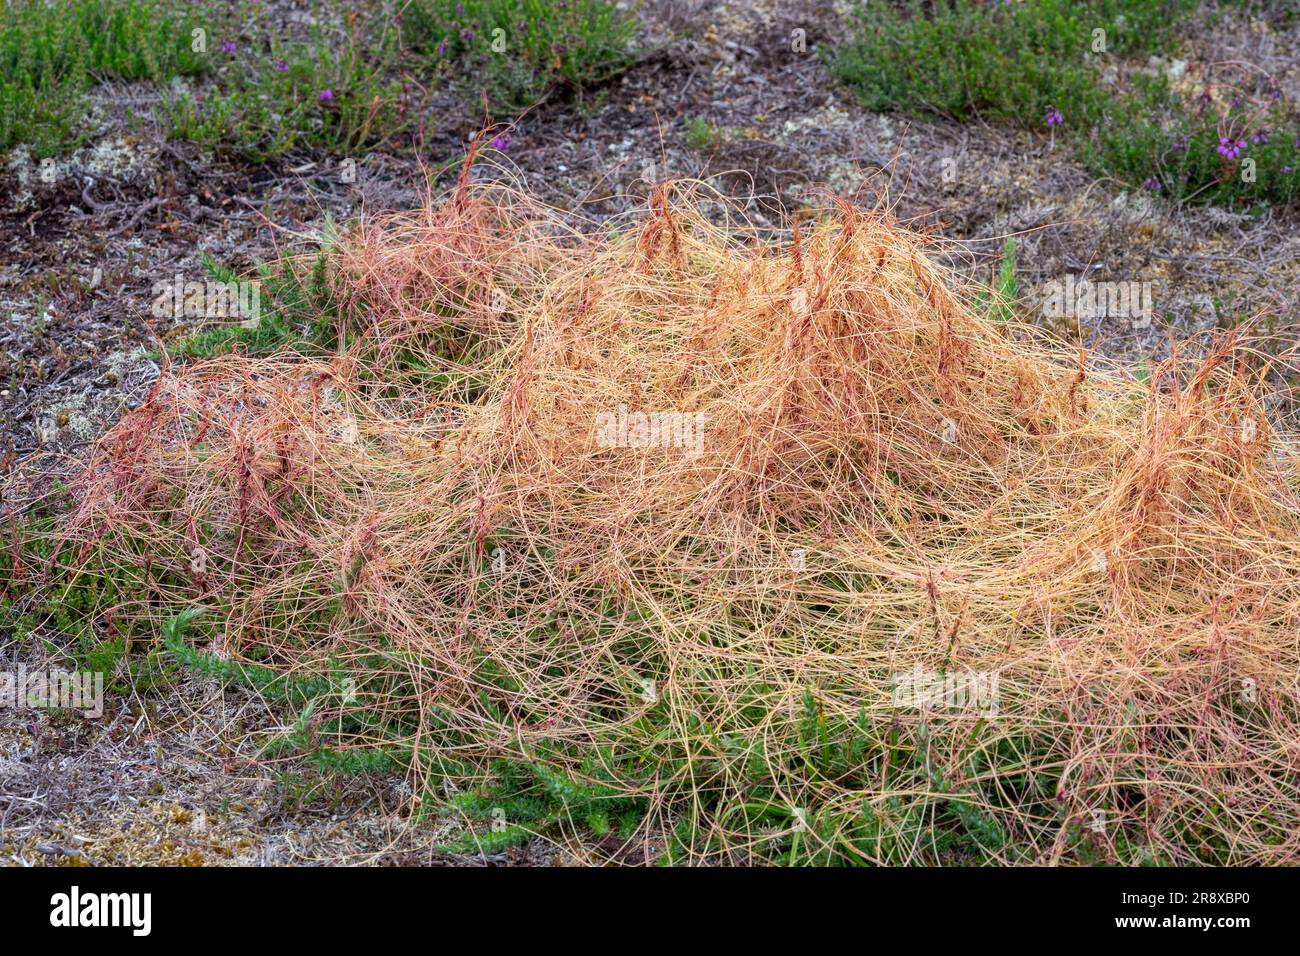 Common Dodder (Cuscuta epithymum), parasitic plant with red stems scrambling over dwarf gorse on sandy heathland in June, Surrey, England, UK Stock Photo